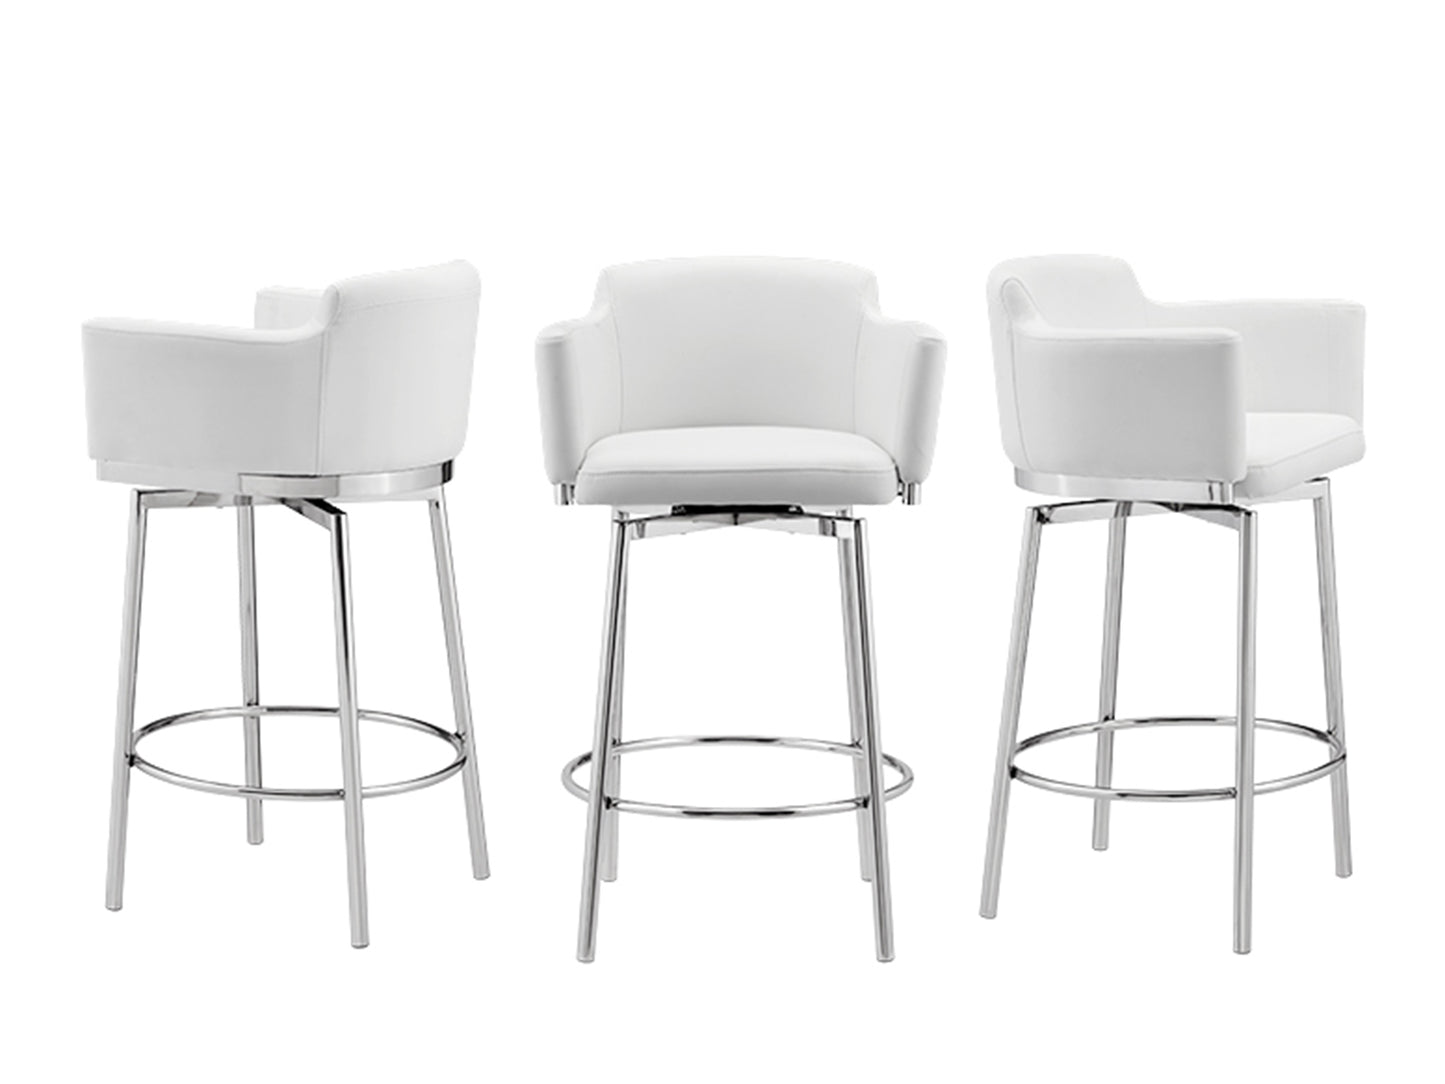 SUZZIE COUNTER STOOL | WHITE